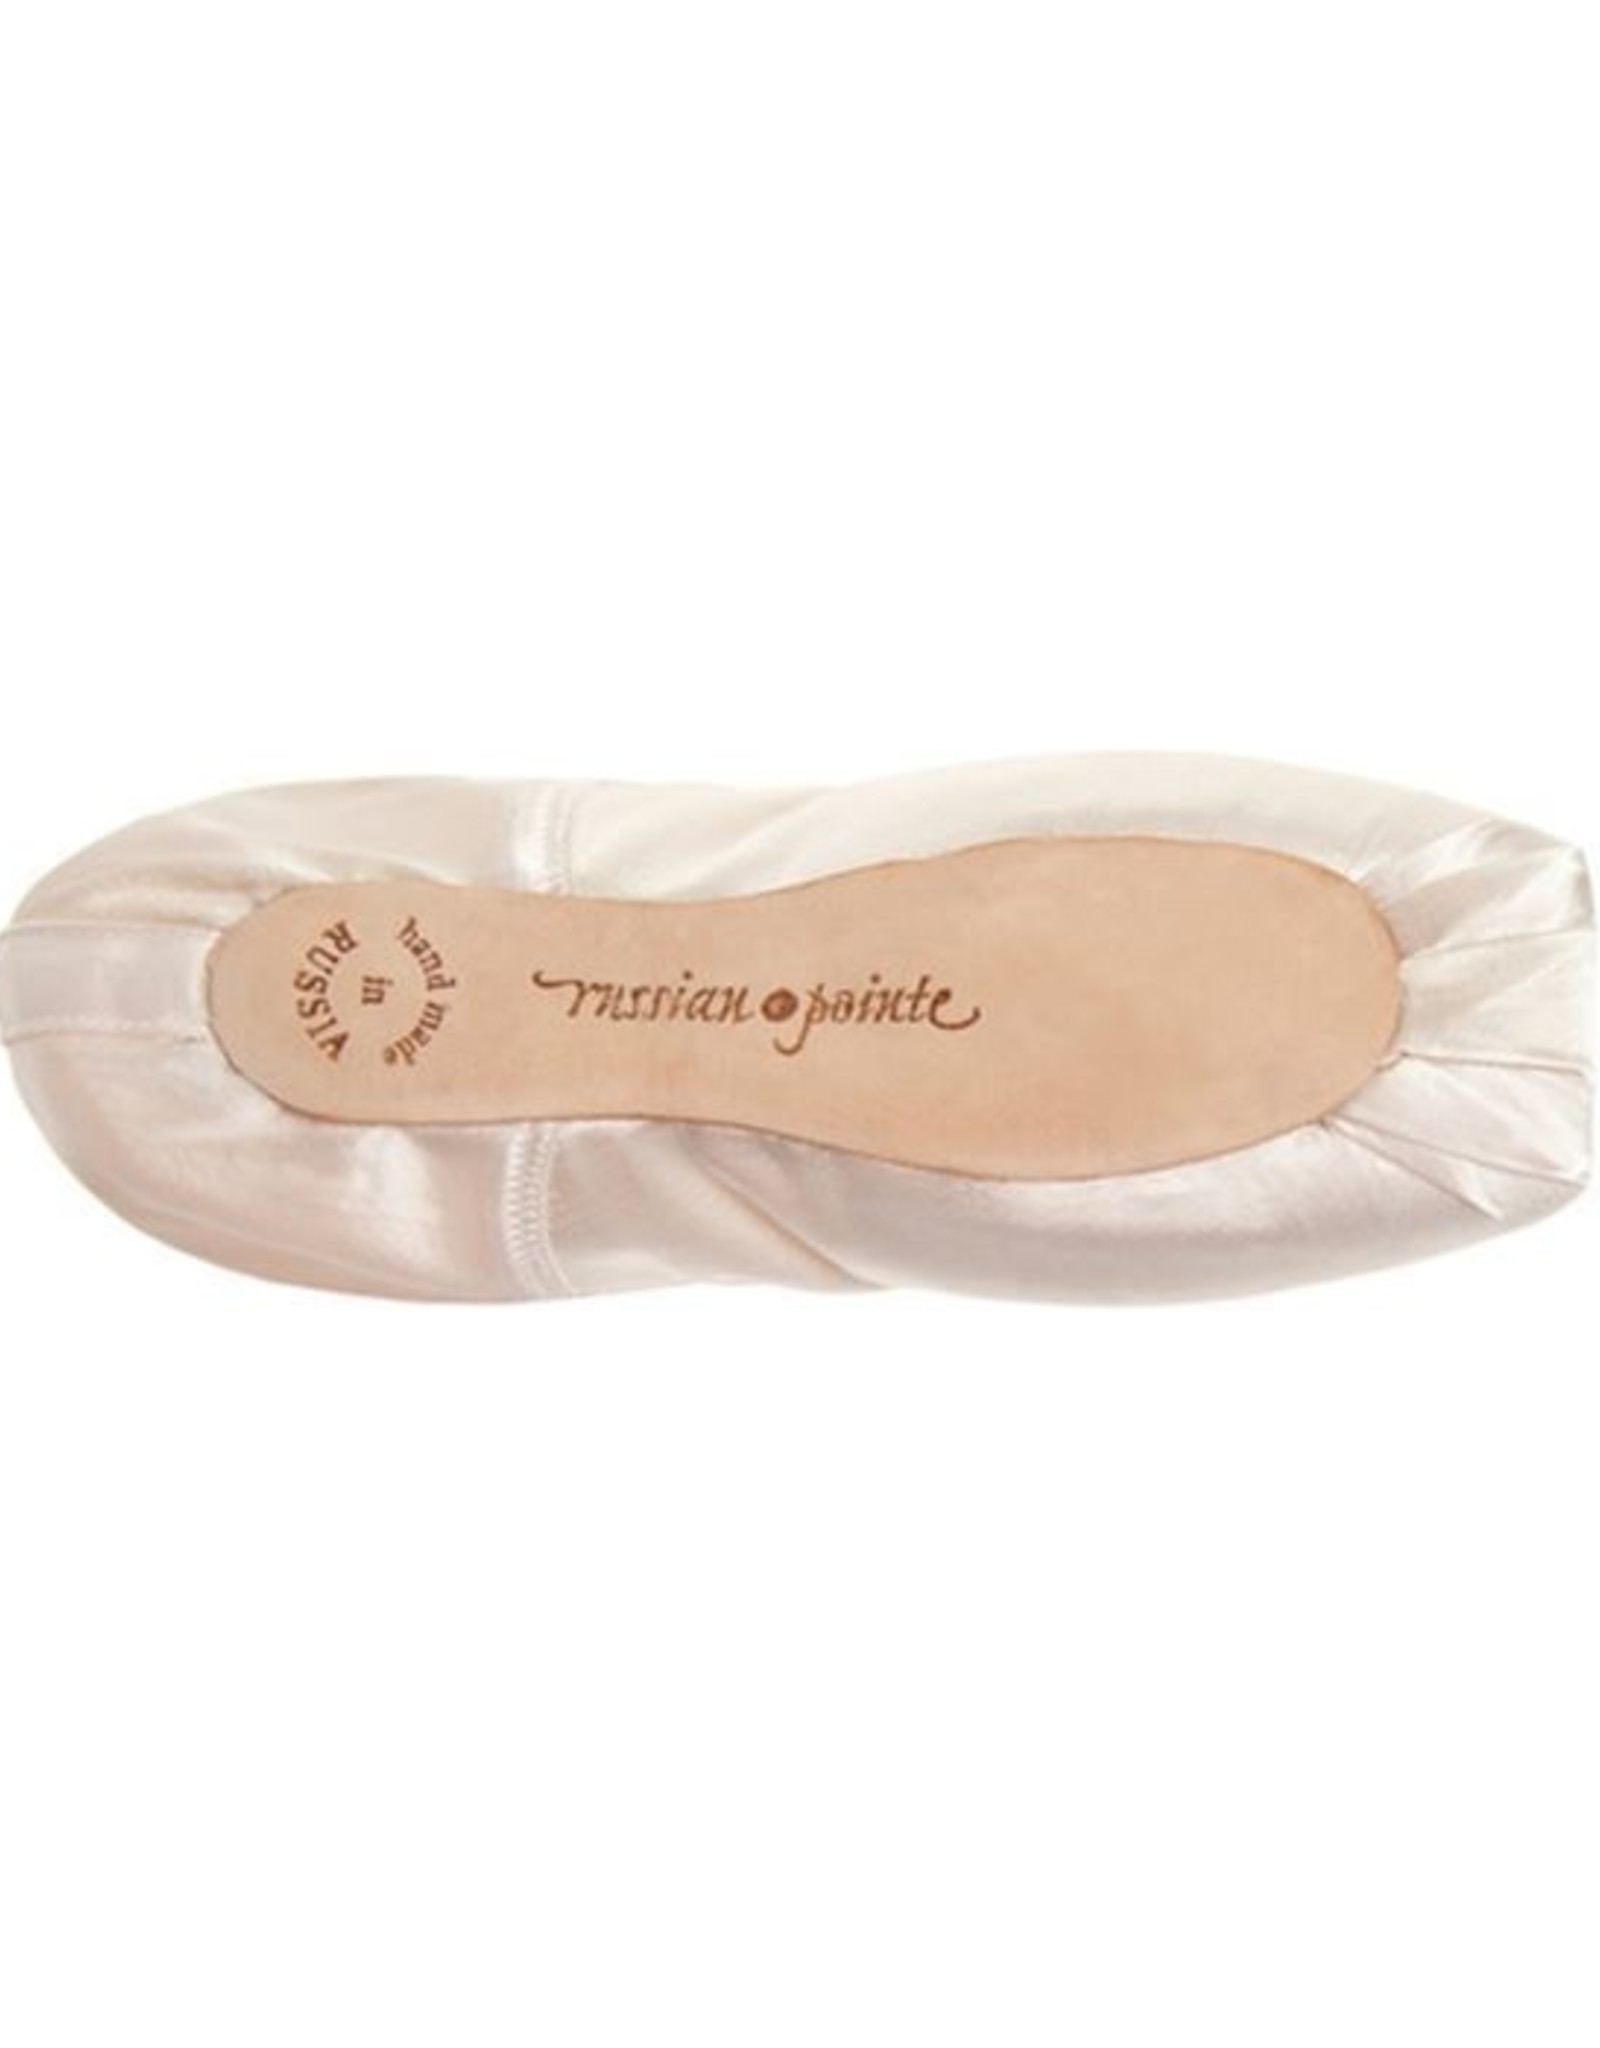 RP Collection Lumina Pointe Shoes